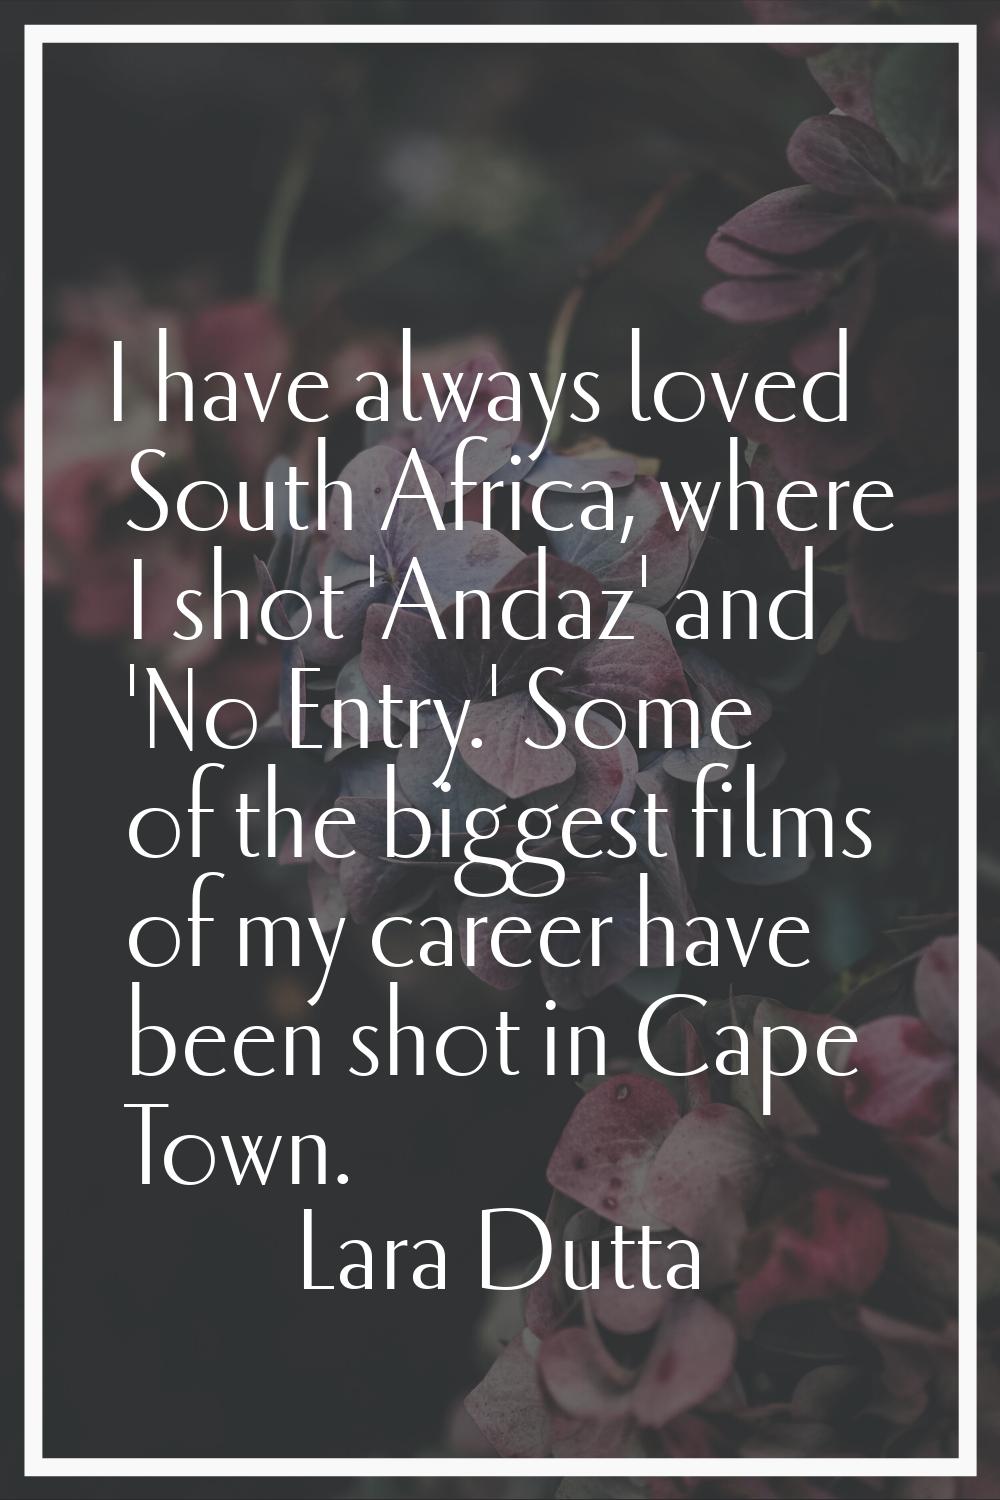 I have always loved South Africa, where I shot 'Andaz' and 'No Entry.' Some of the biggest films of